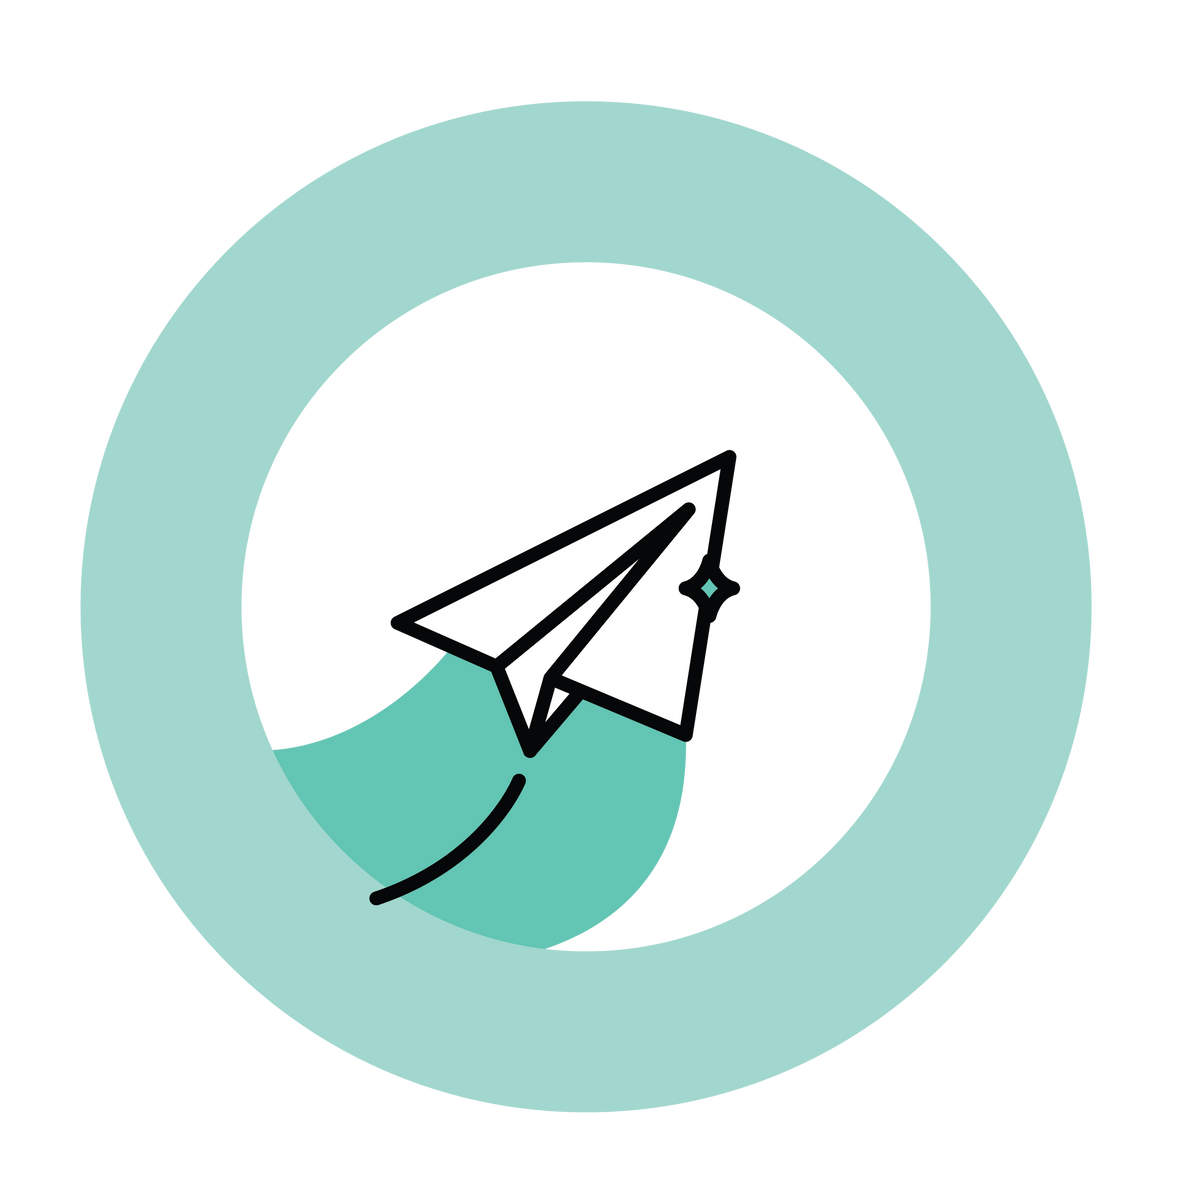 illustrated paper air plane flying inside a teal circle 